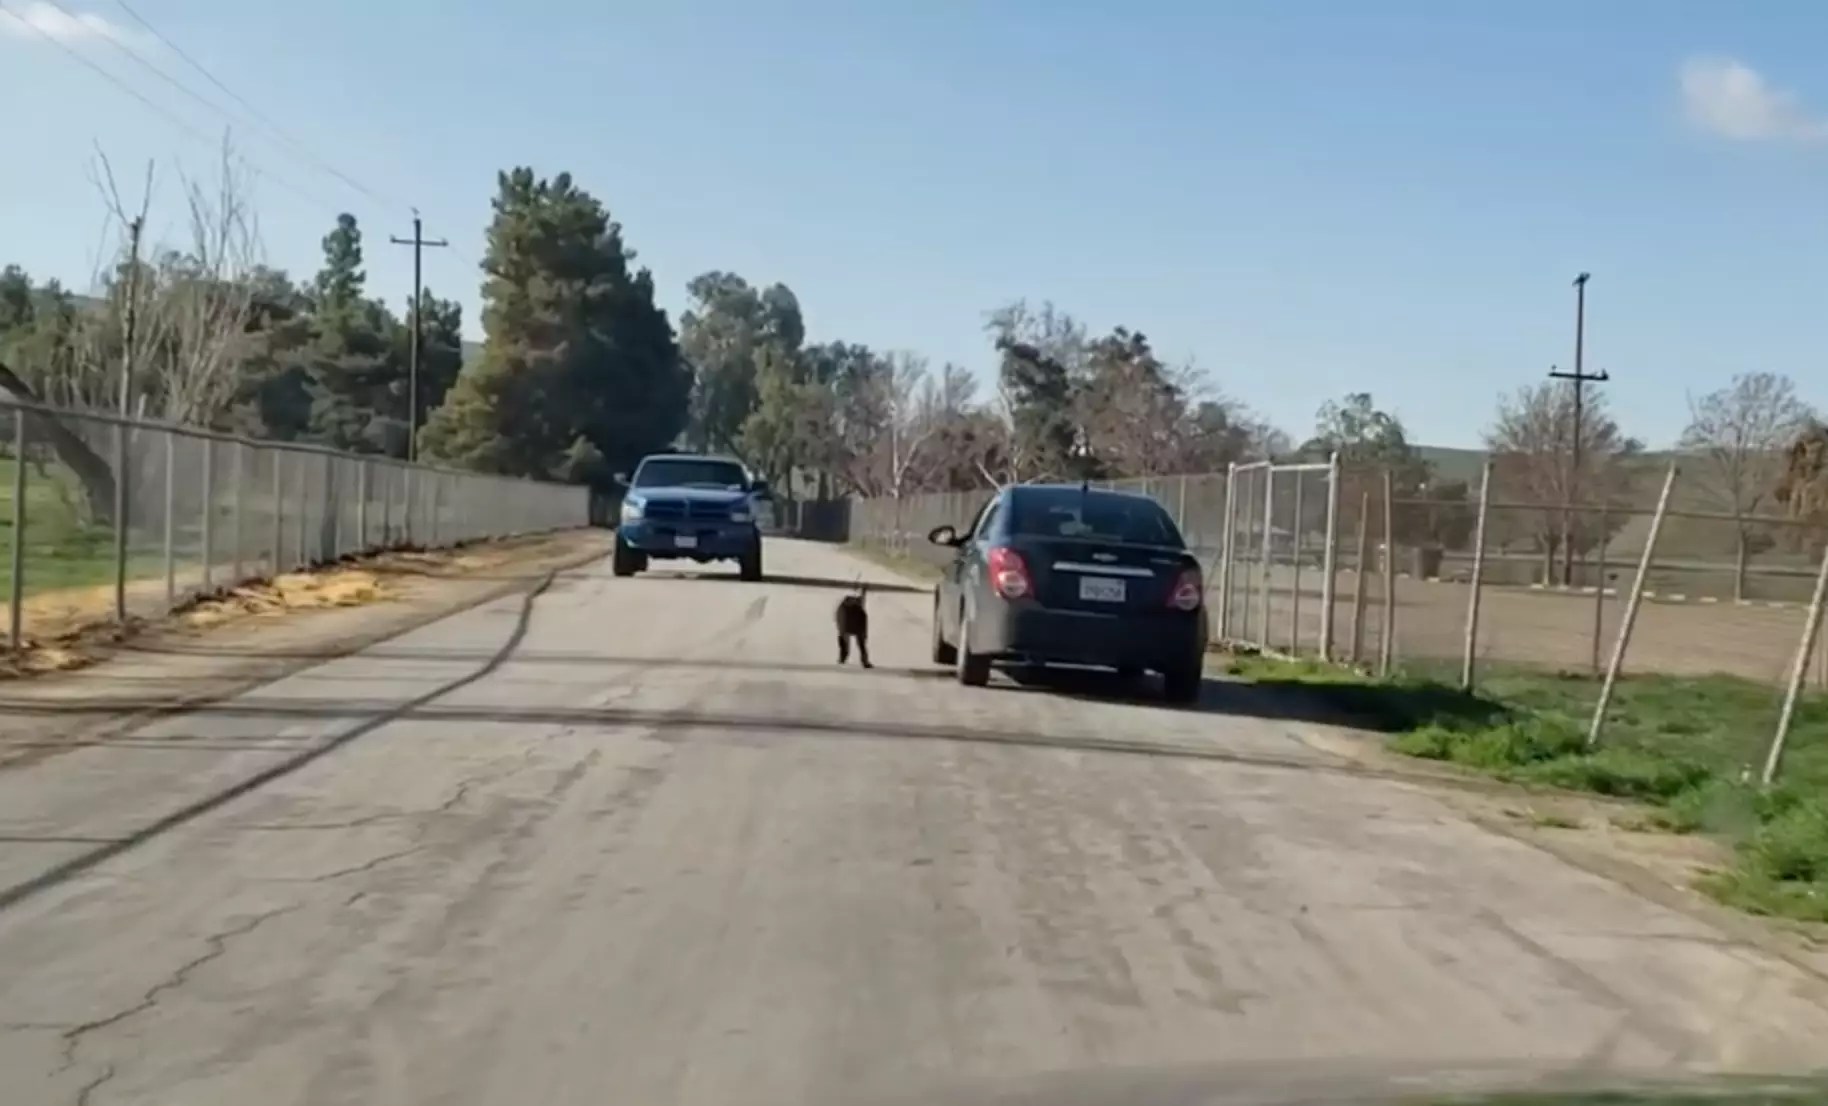 The dog was captured running after the vehicle.